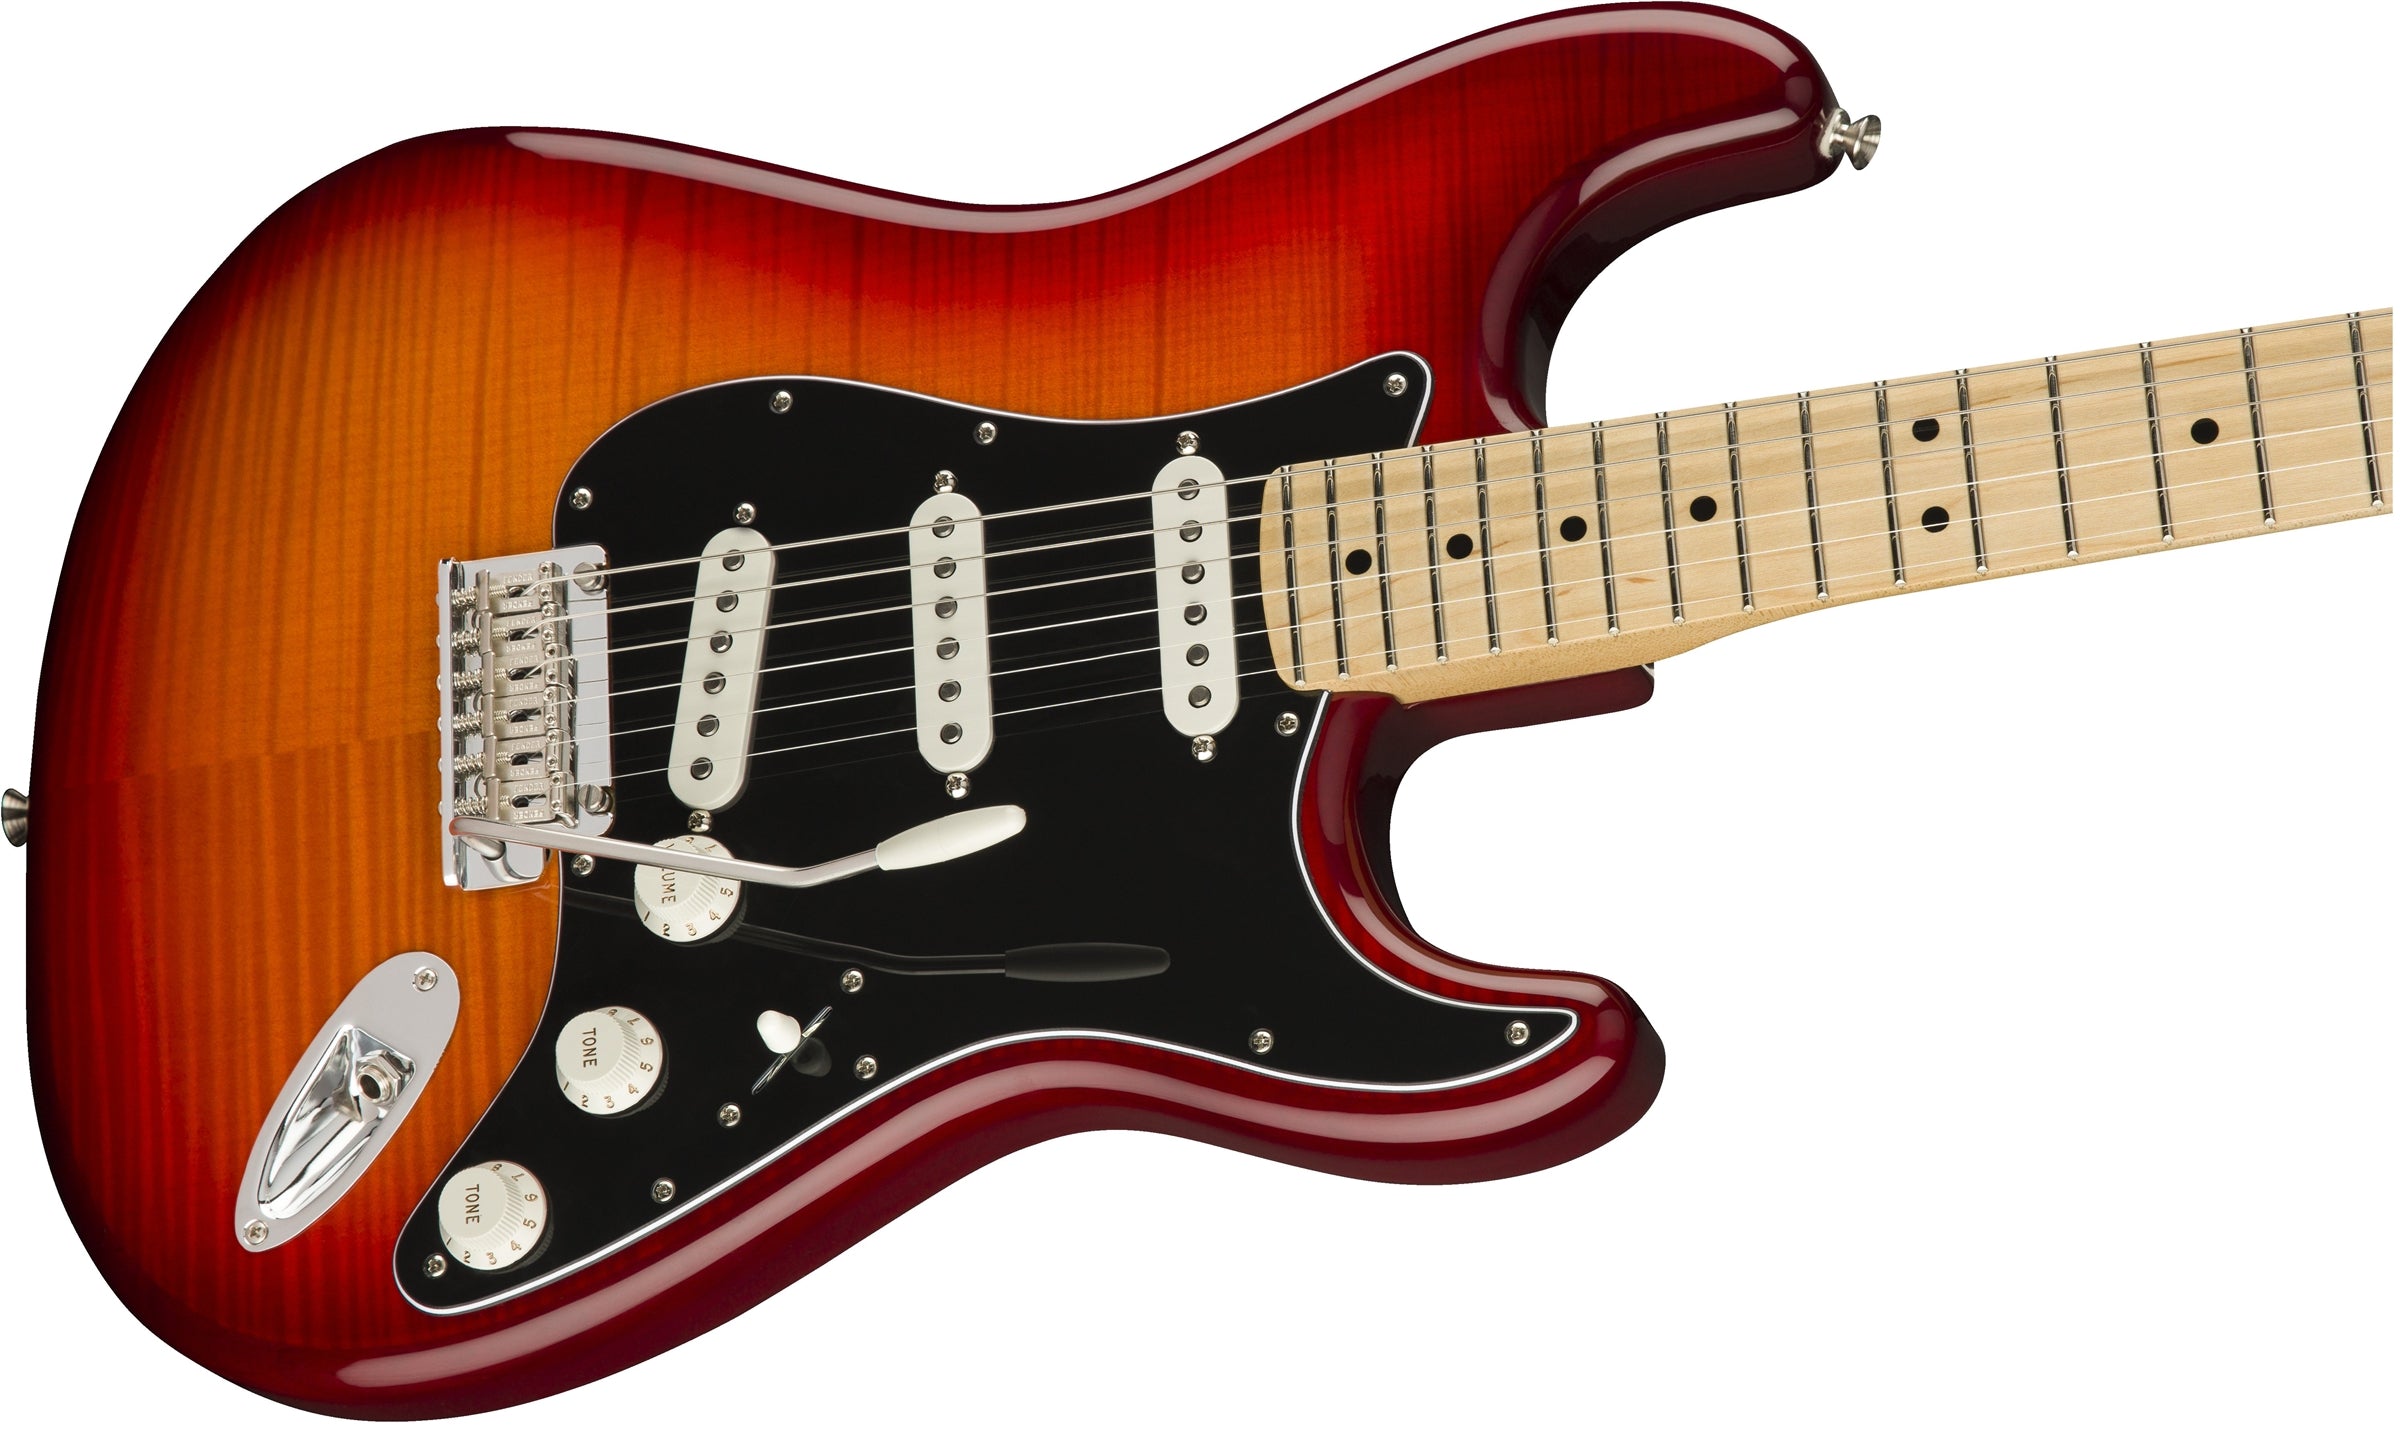 Fender Player Stratocaster® Plus Top, Maple Fingerboard, Aged Cherry Burst - Electric Guitar 電結他